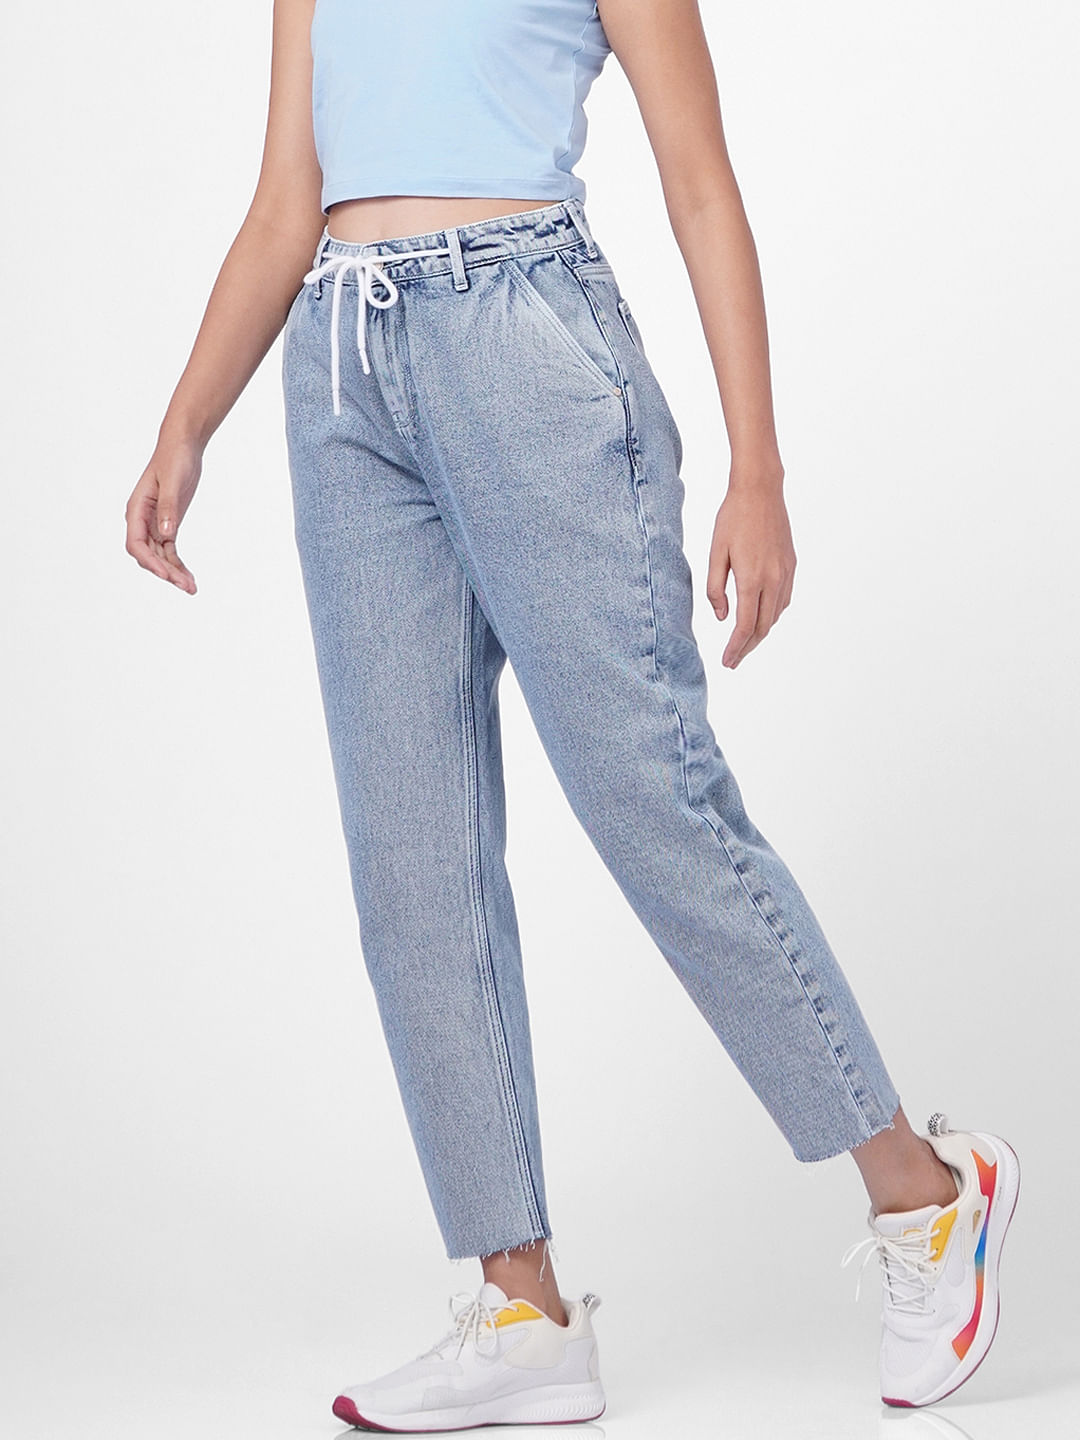 Wardrobe Must-have: 9 Types Of Jeans For Girls | Bewakoof